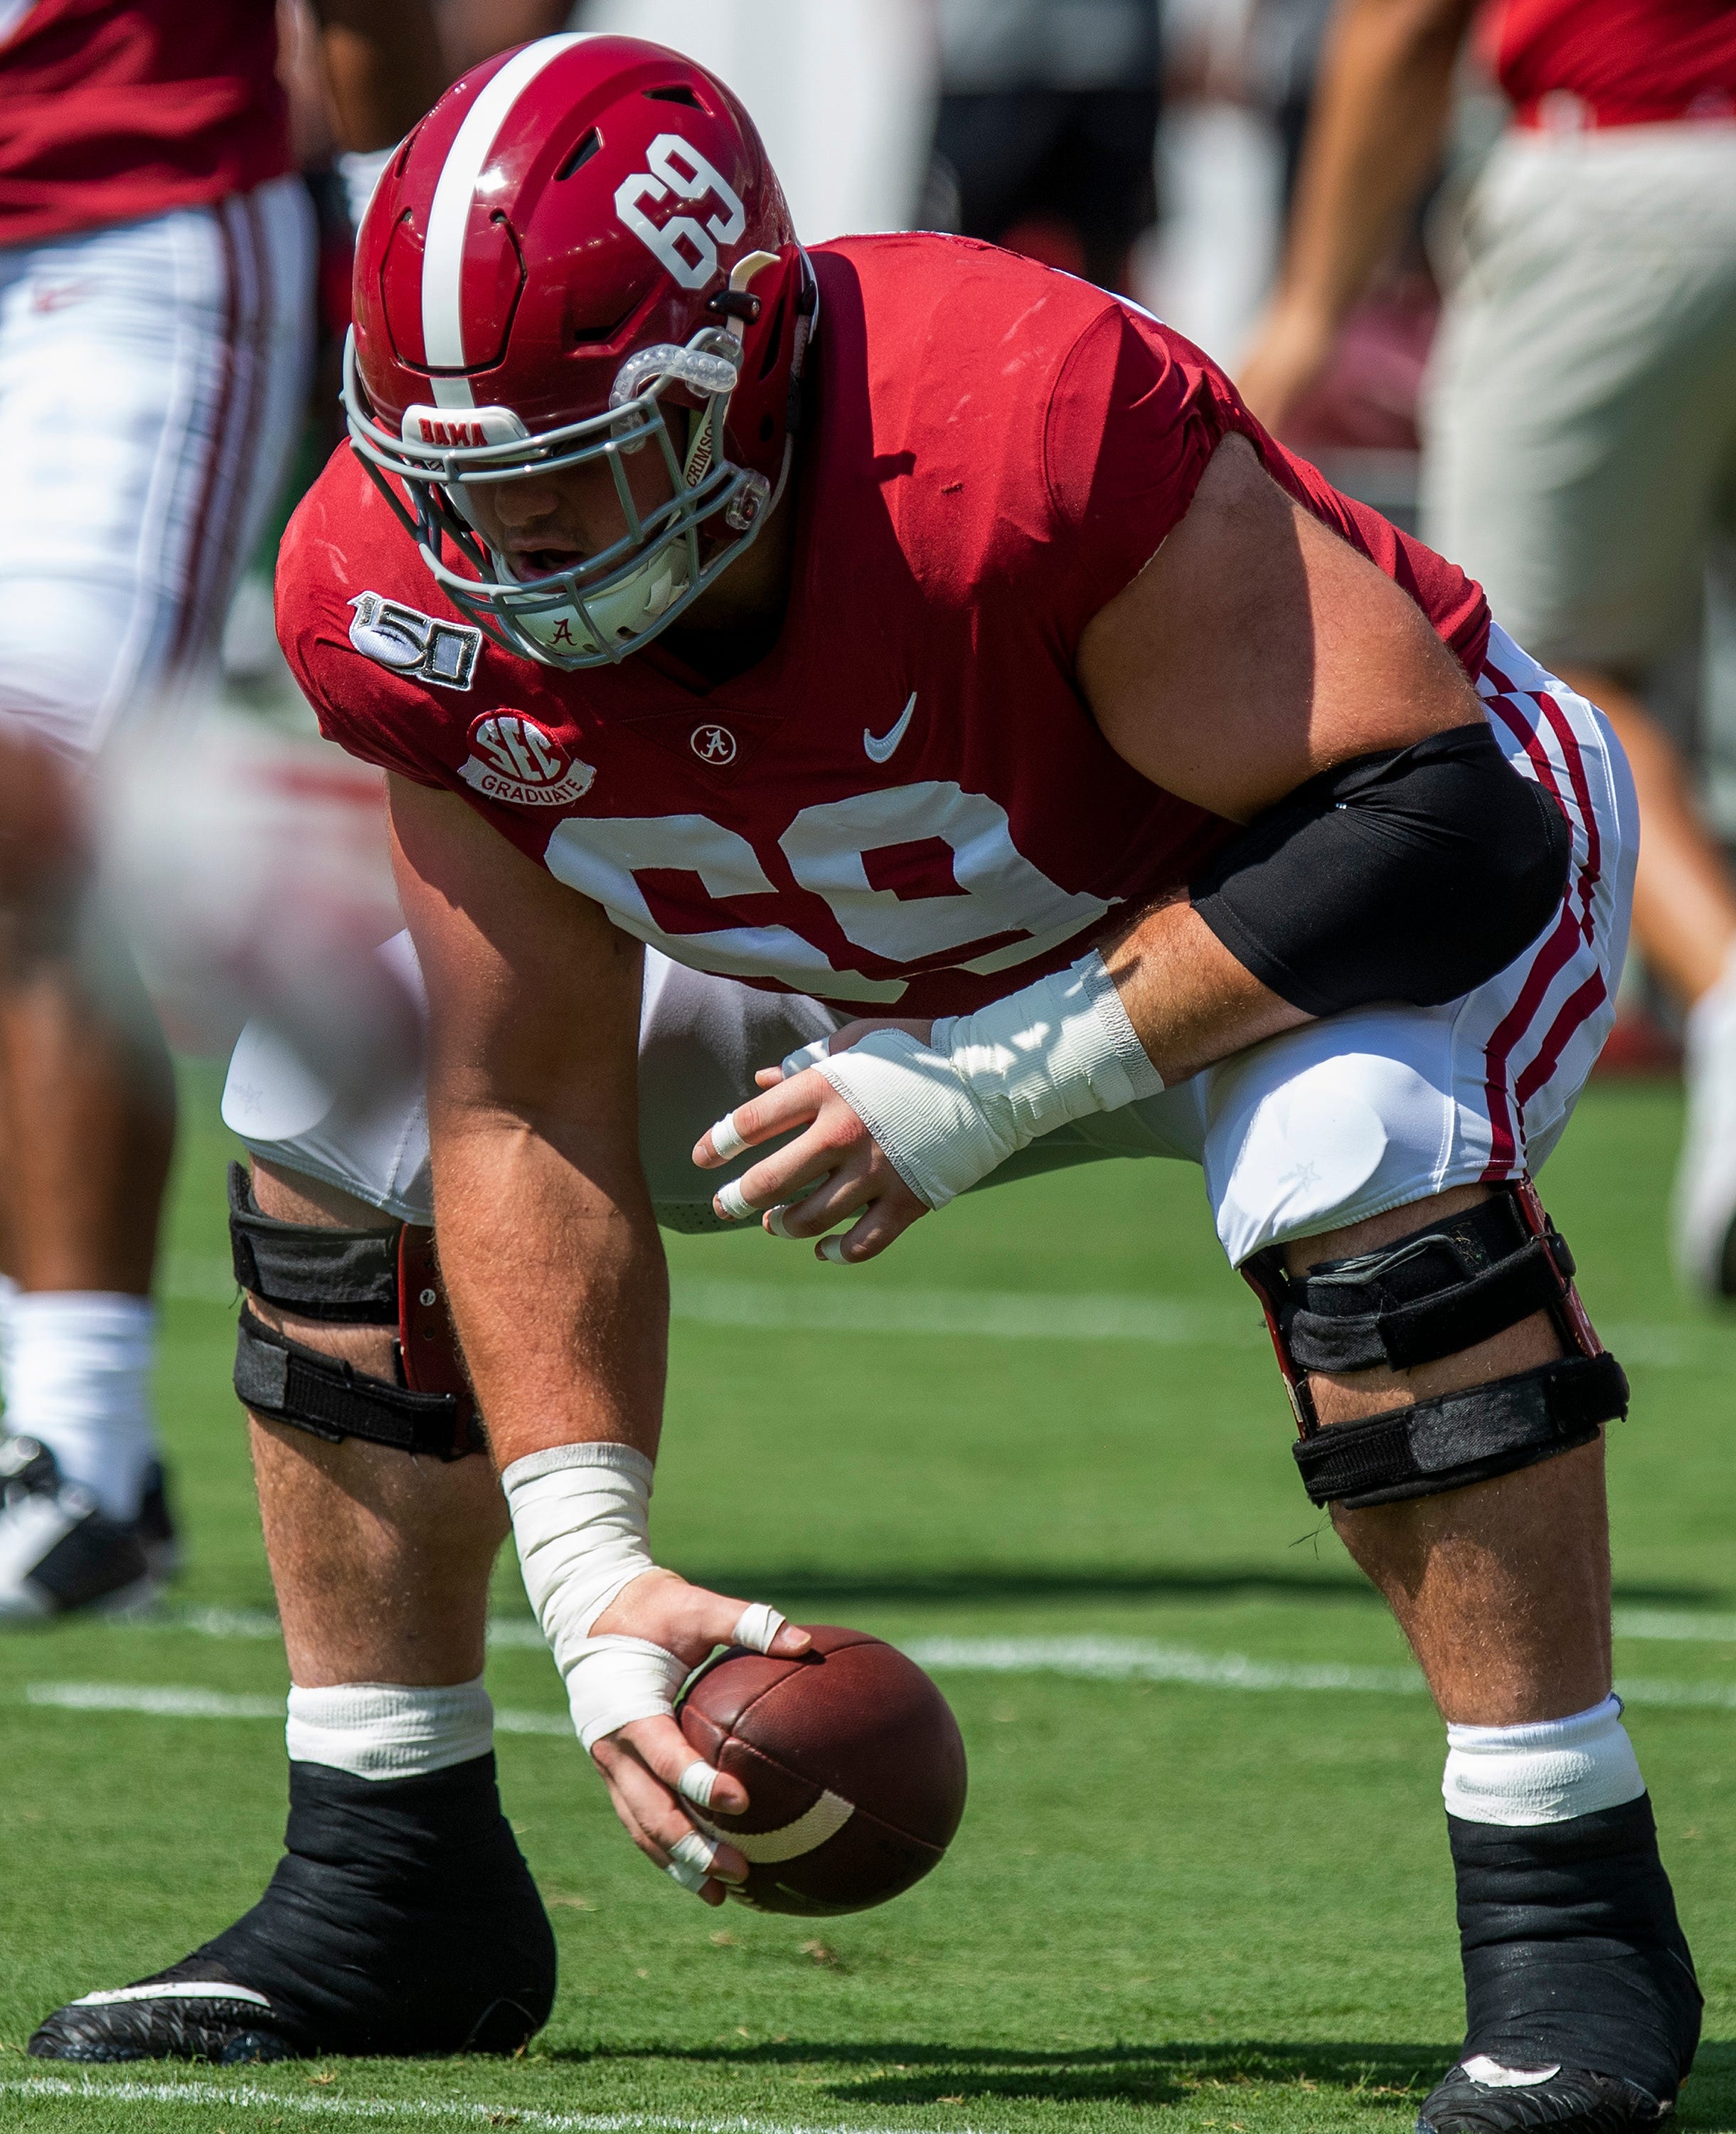 Alabama offensive lineman Landon Dickerson (69) during warm ups before the Ole Miss game at Bryant-Denny Stadium in Tuscaloosa, Ala., on Saturday September 28, 2019.